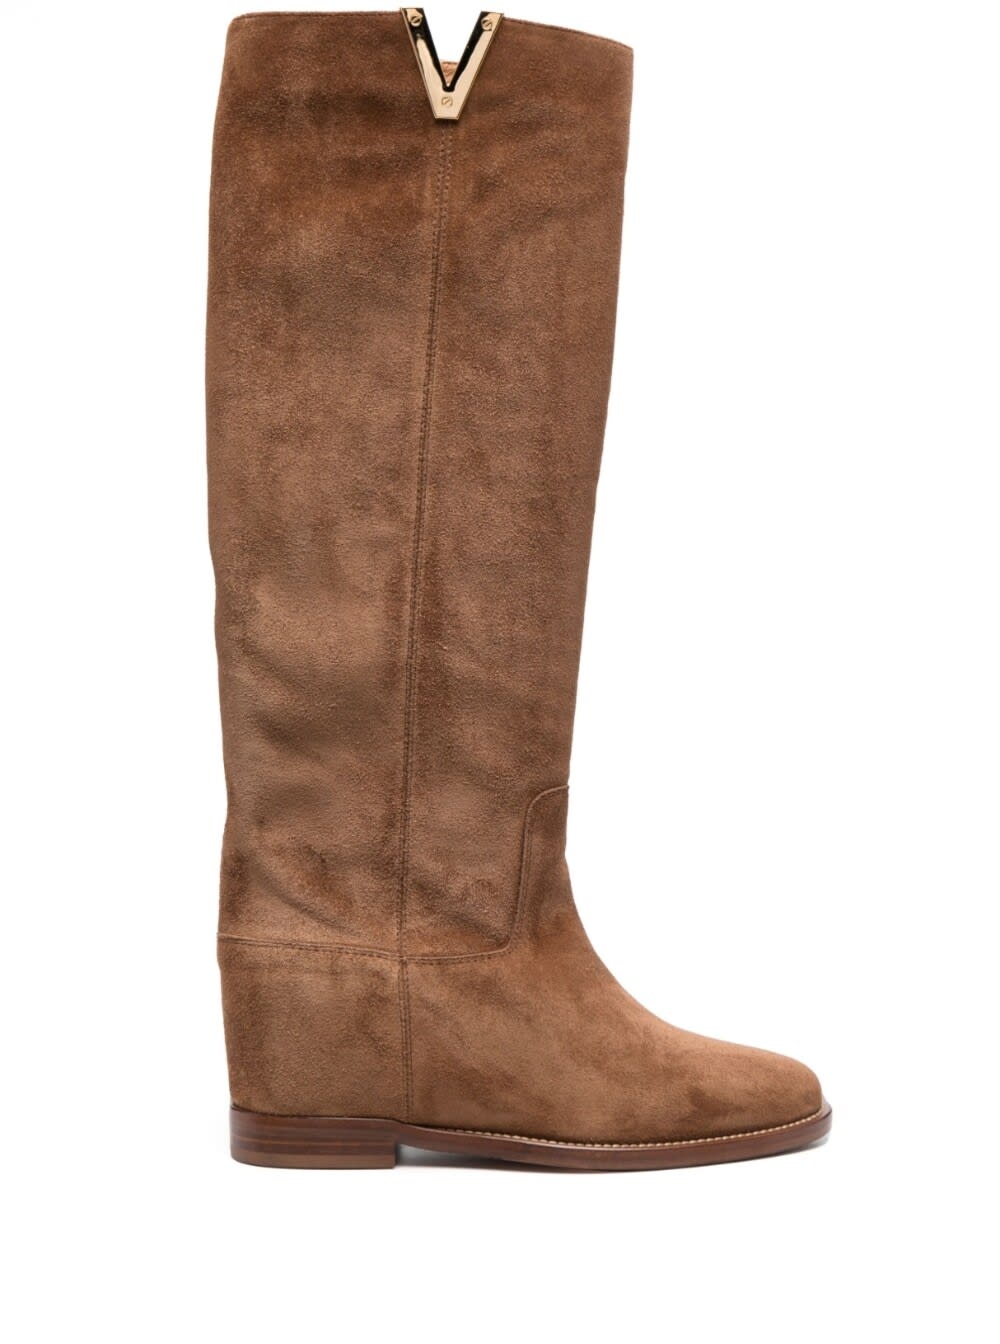 VIA ROMA 15 KNEE LENGTH SUEDE BOOTS IN BROWN LEATHER WOMAN